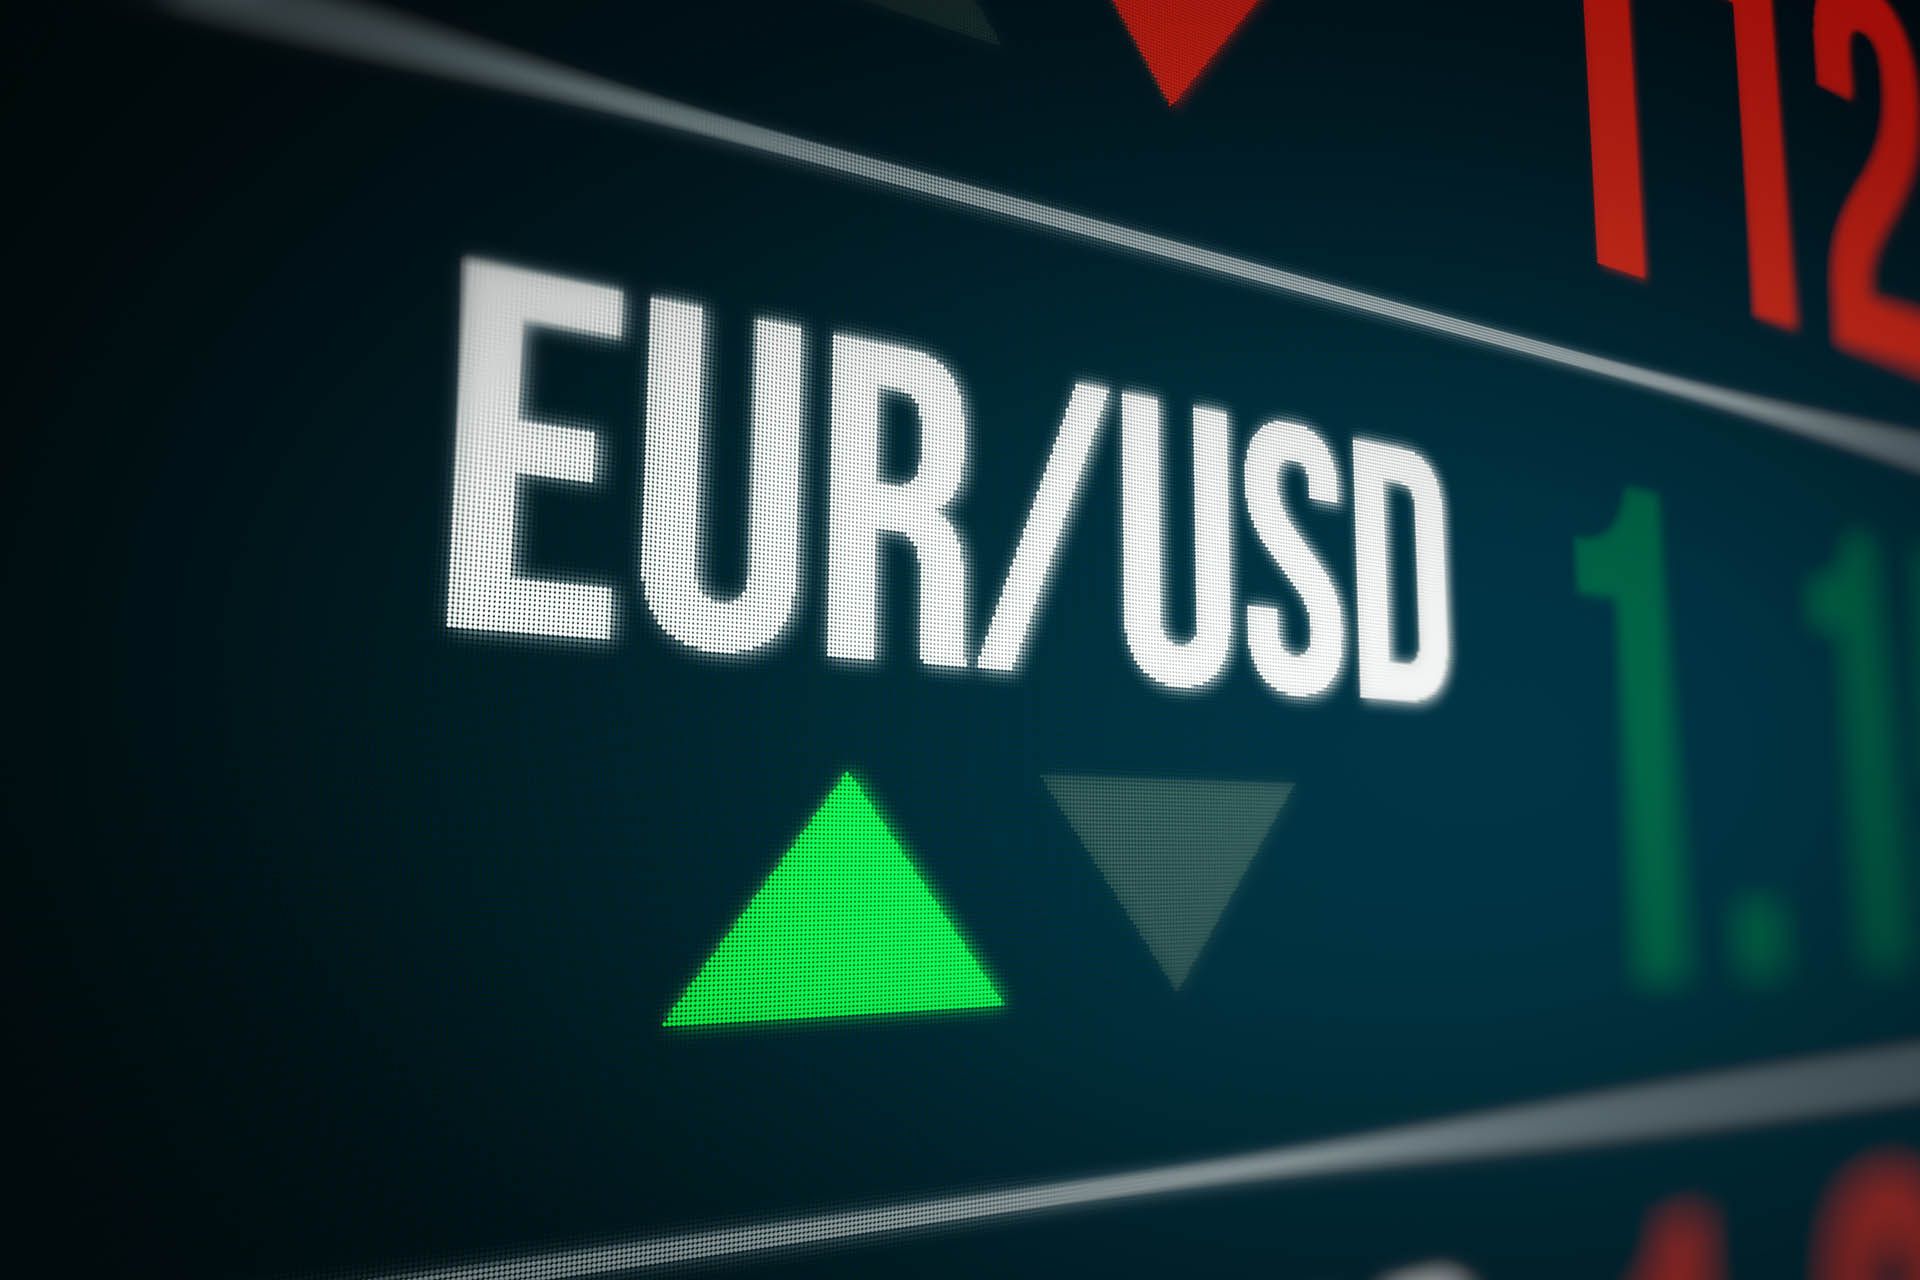 EUR to USD exchange rate forecasts